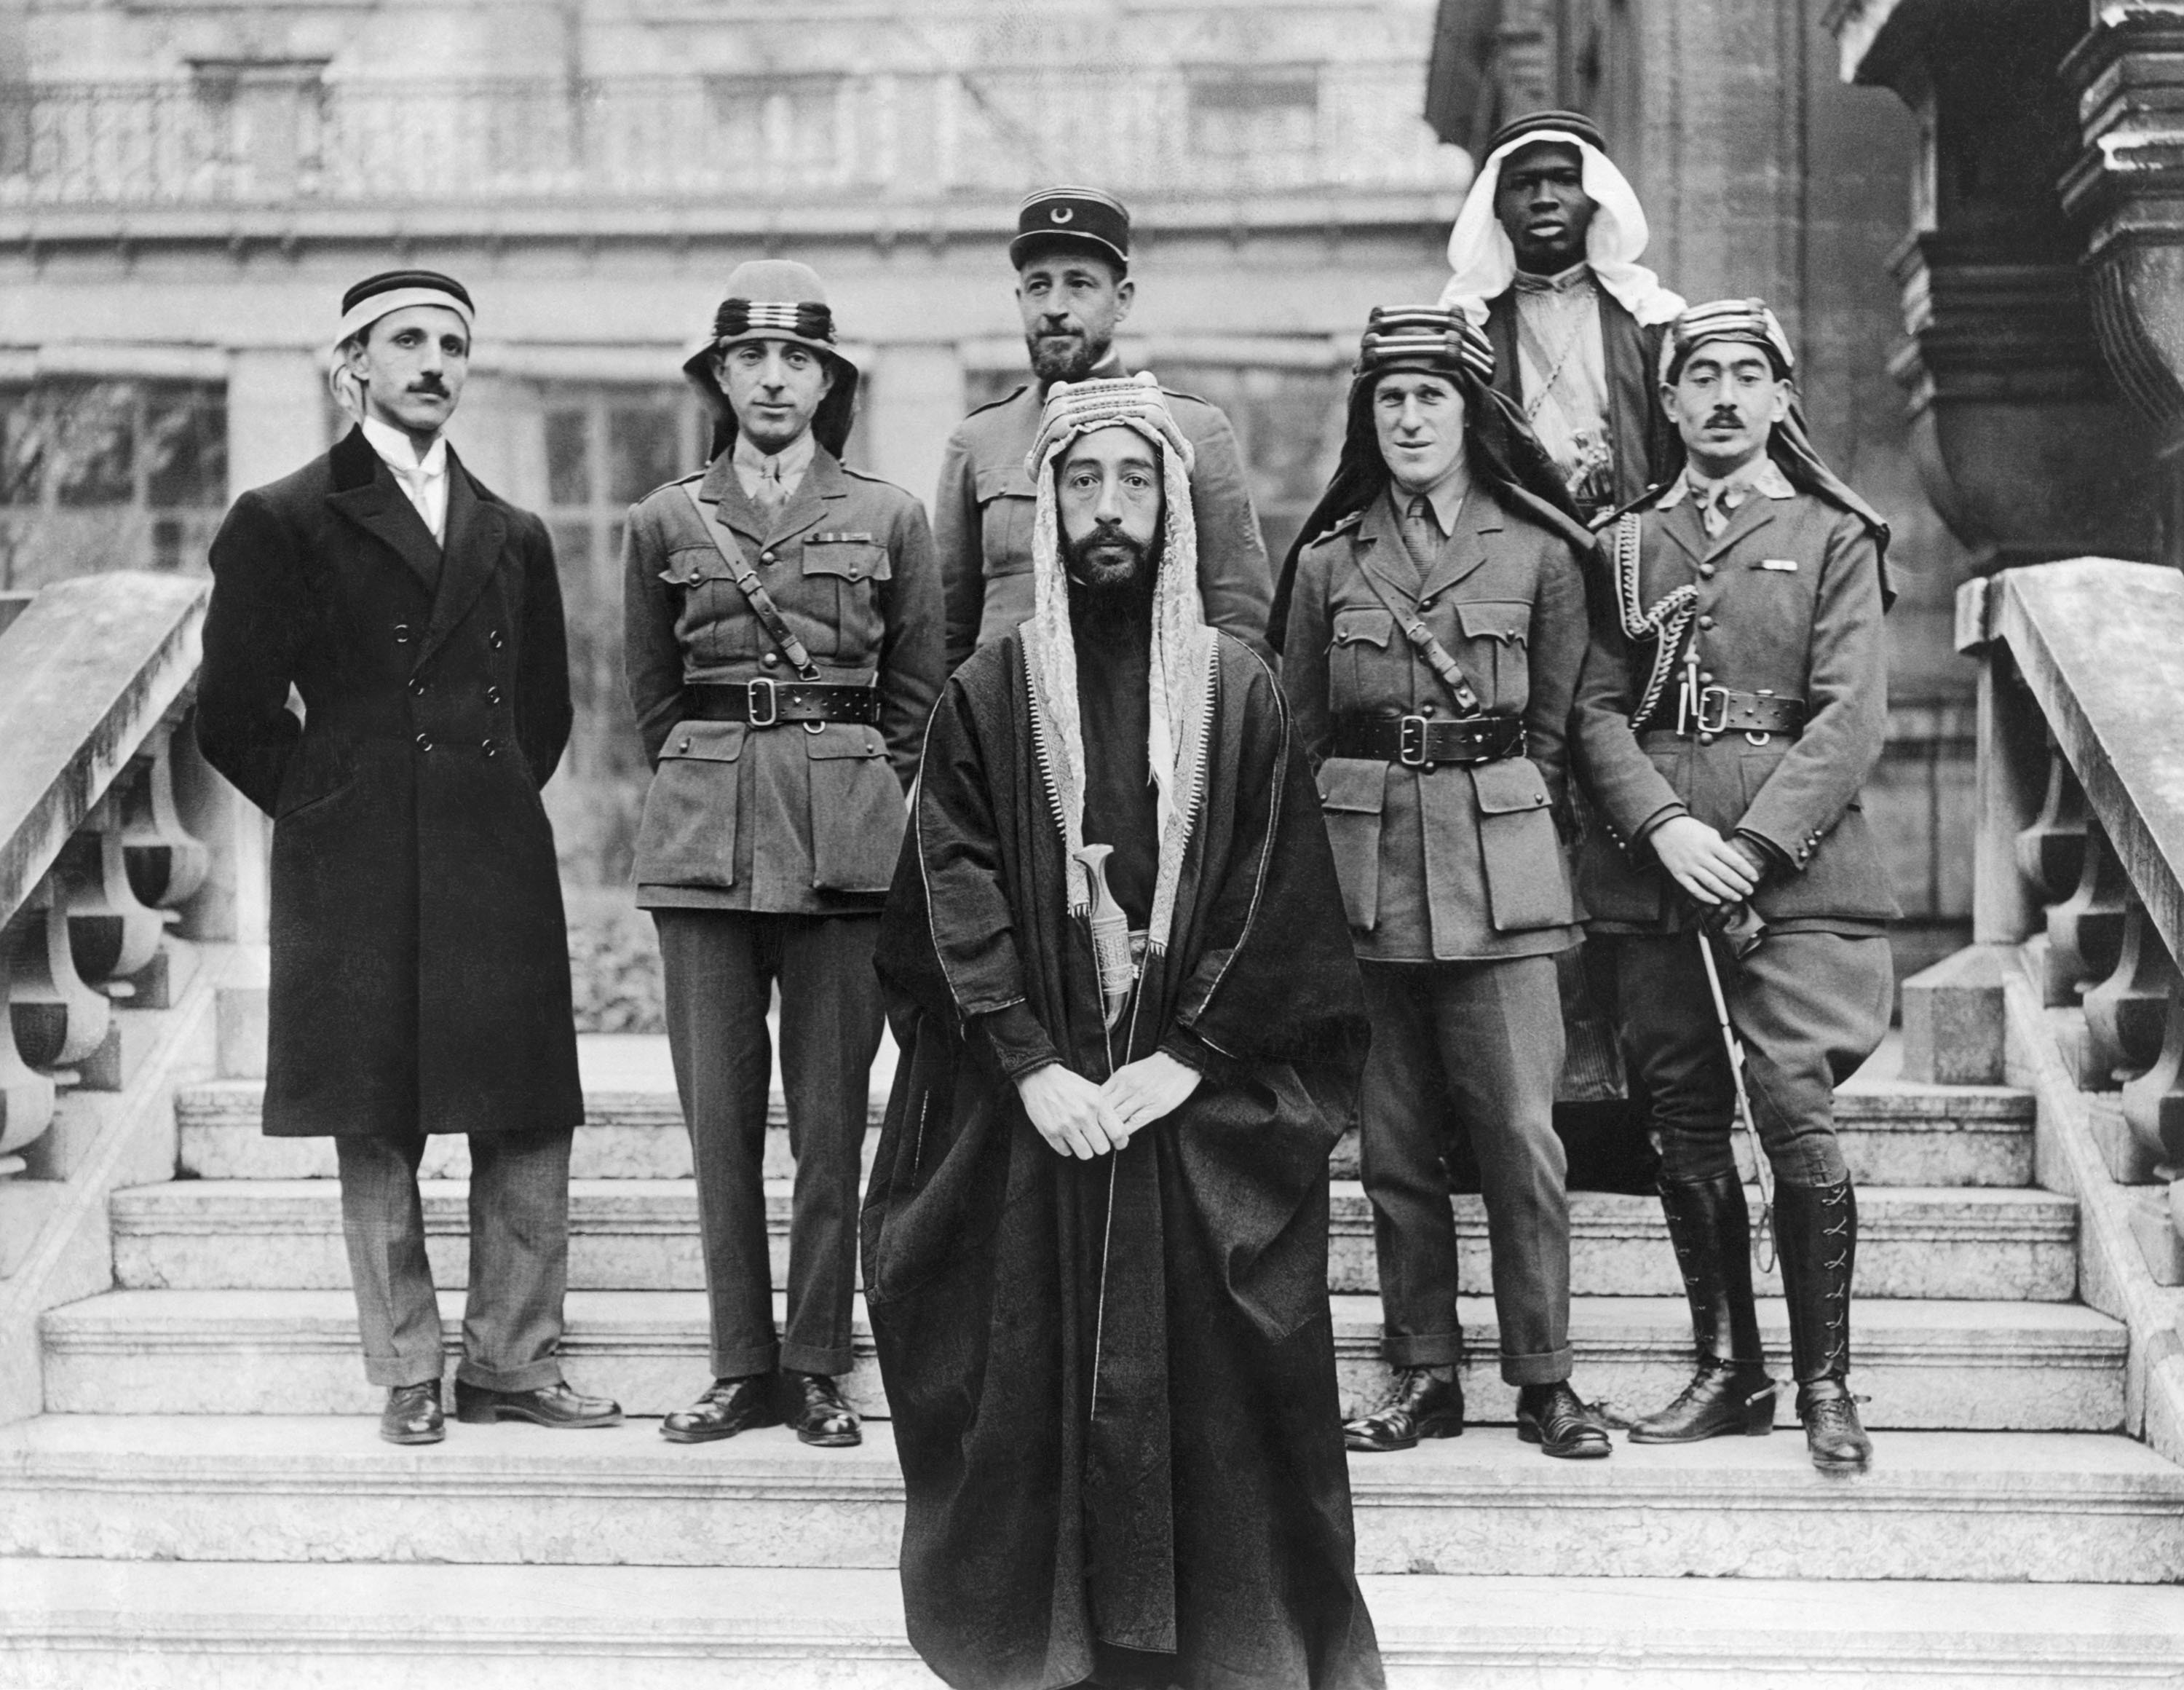 King Faisal of Iraq (C) with his delegates and advisors, including T. E. Lawrence (C-R), at the Versailles peace conference, Paris, France, Jan. 22, 1919. (Getty Images)